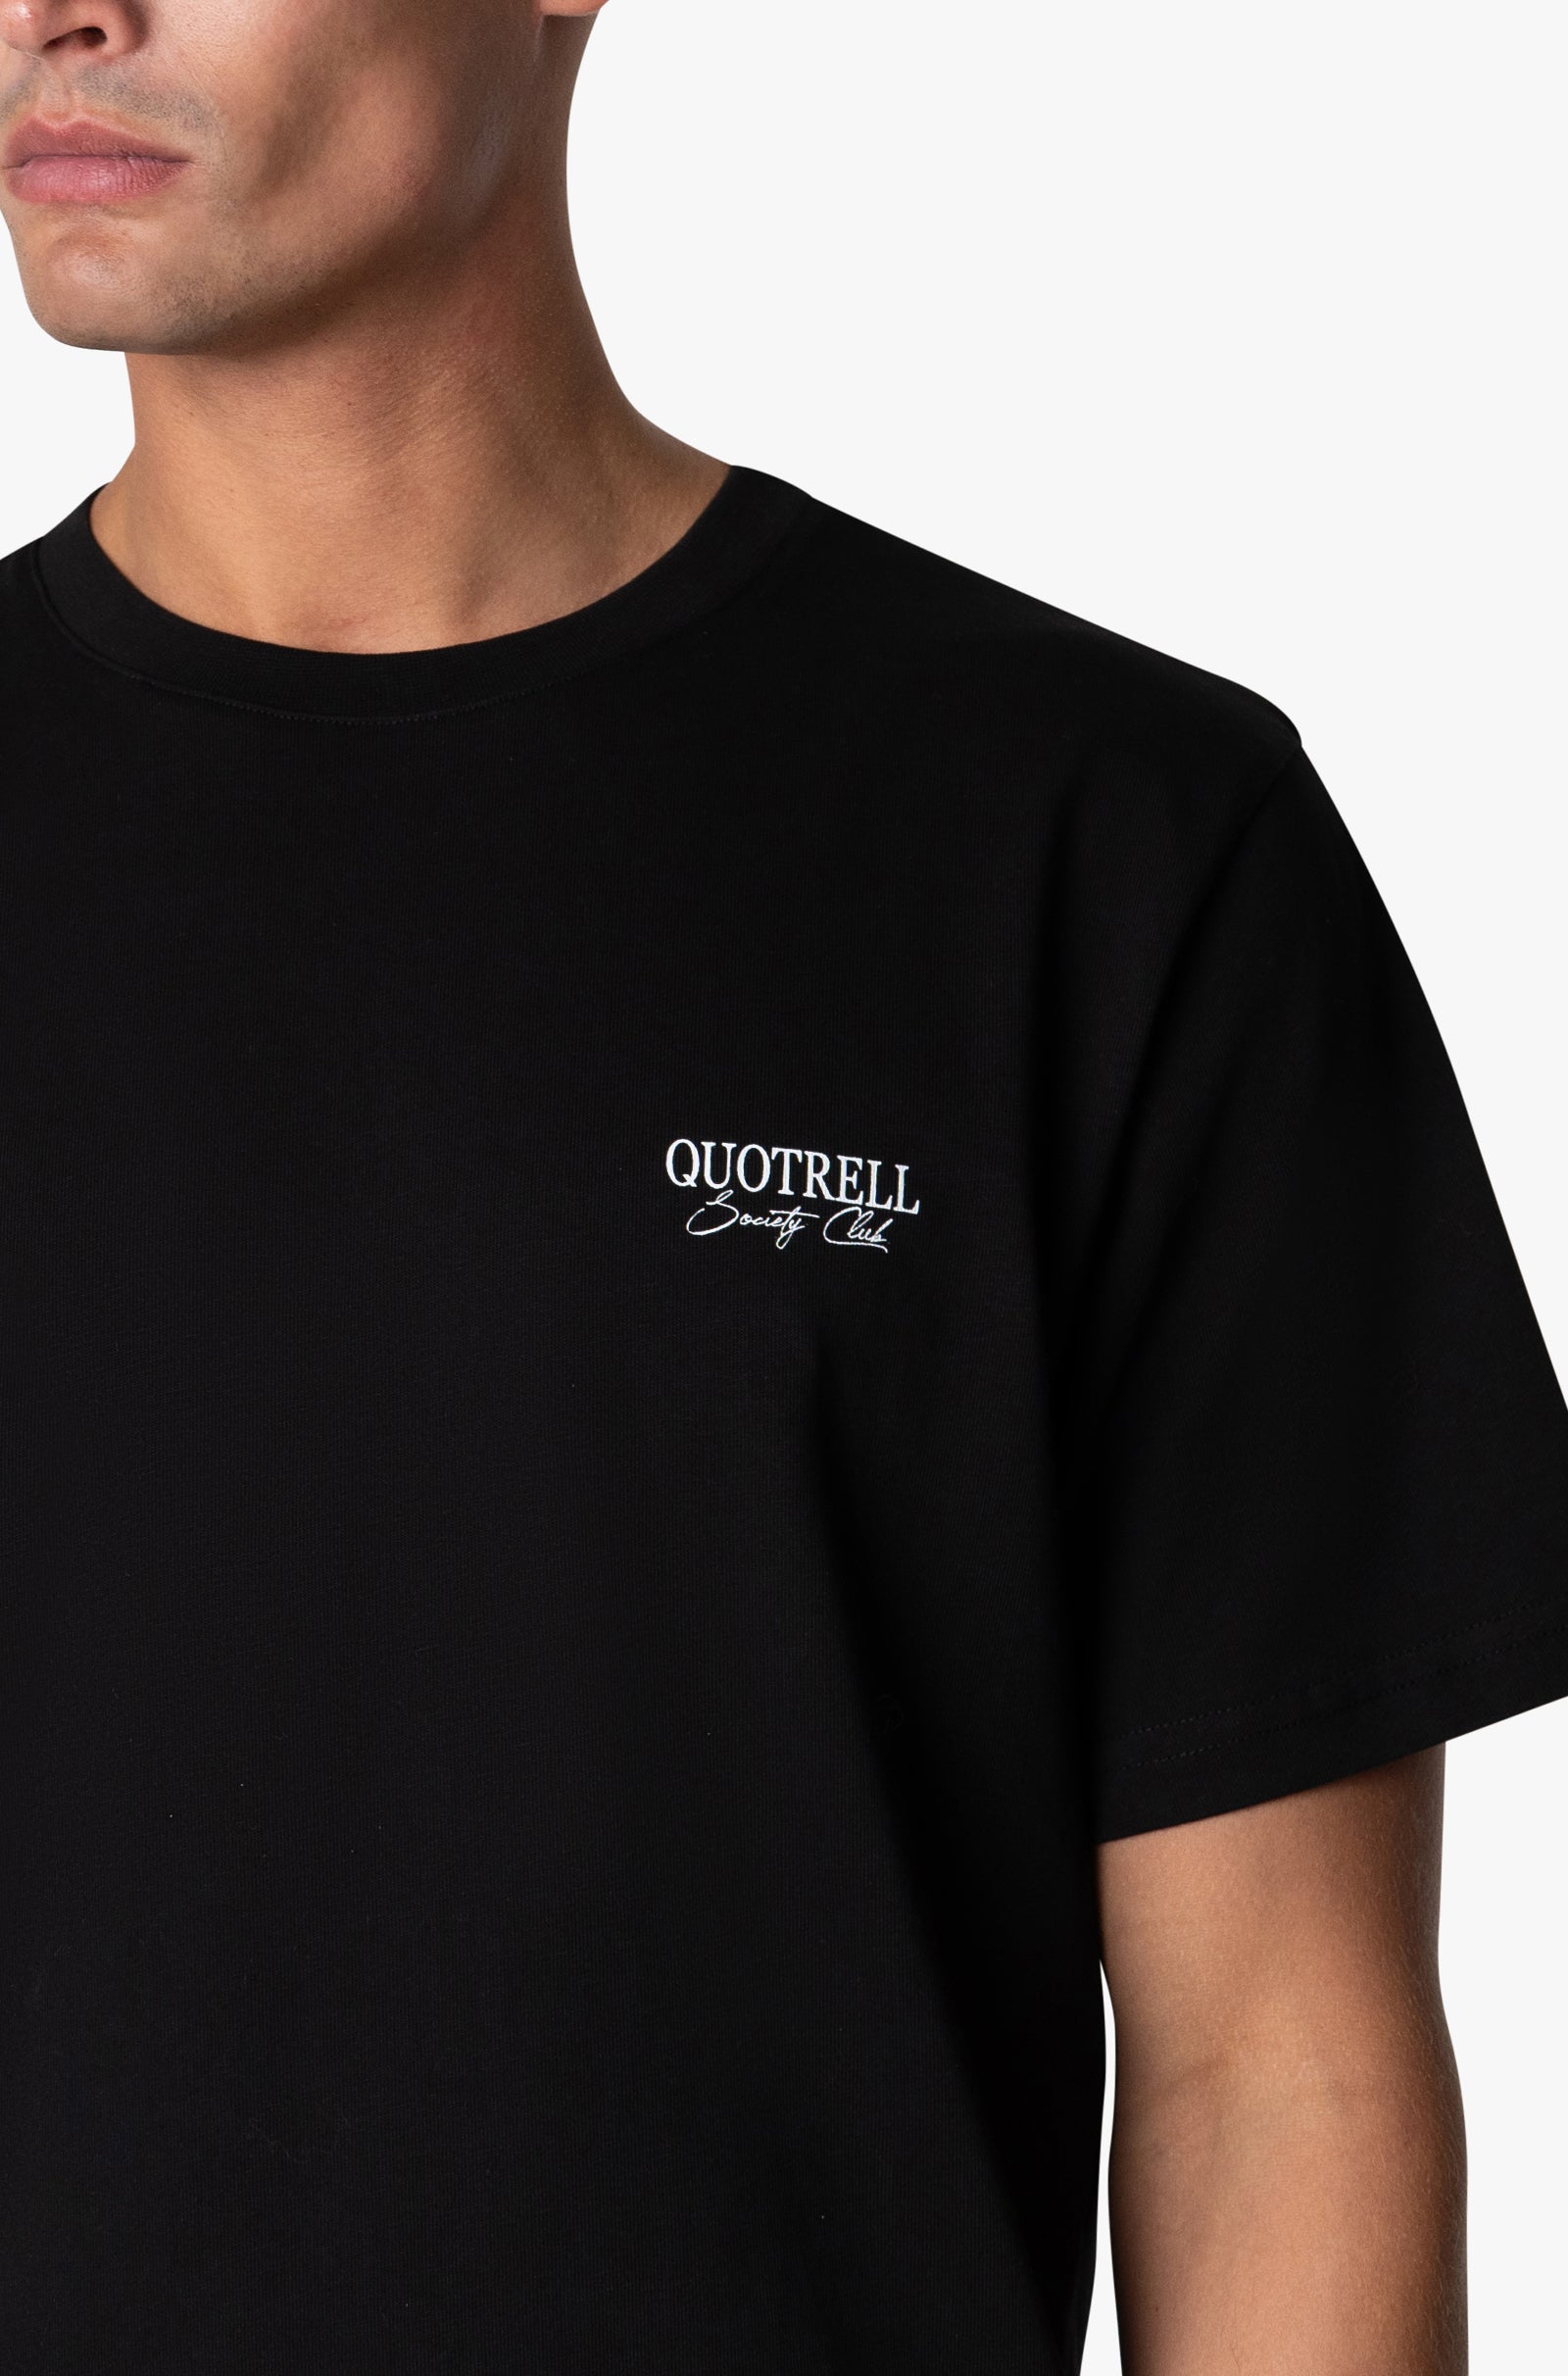 Quotrell Victorie T-shirt